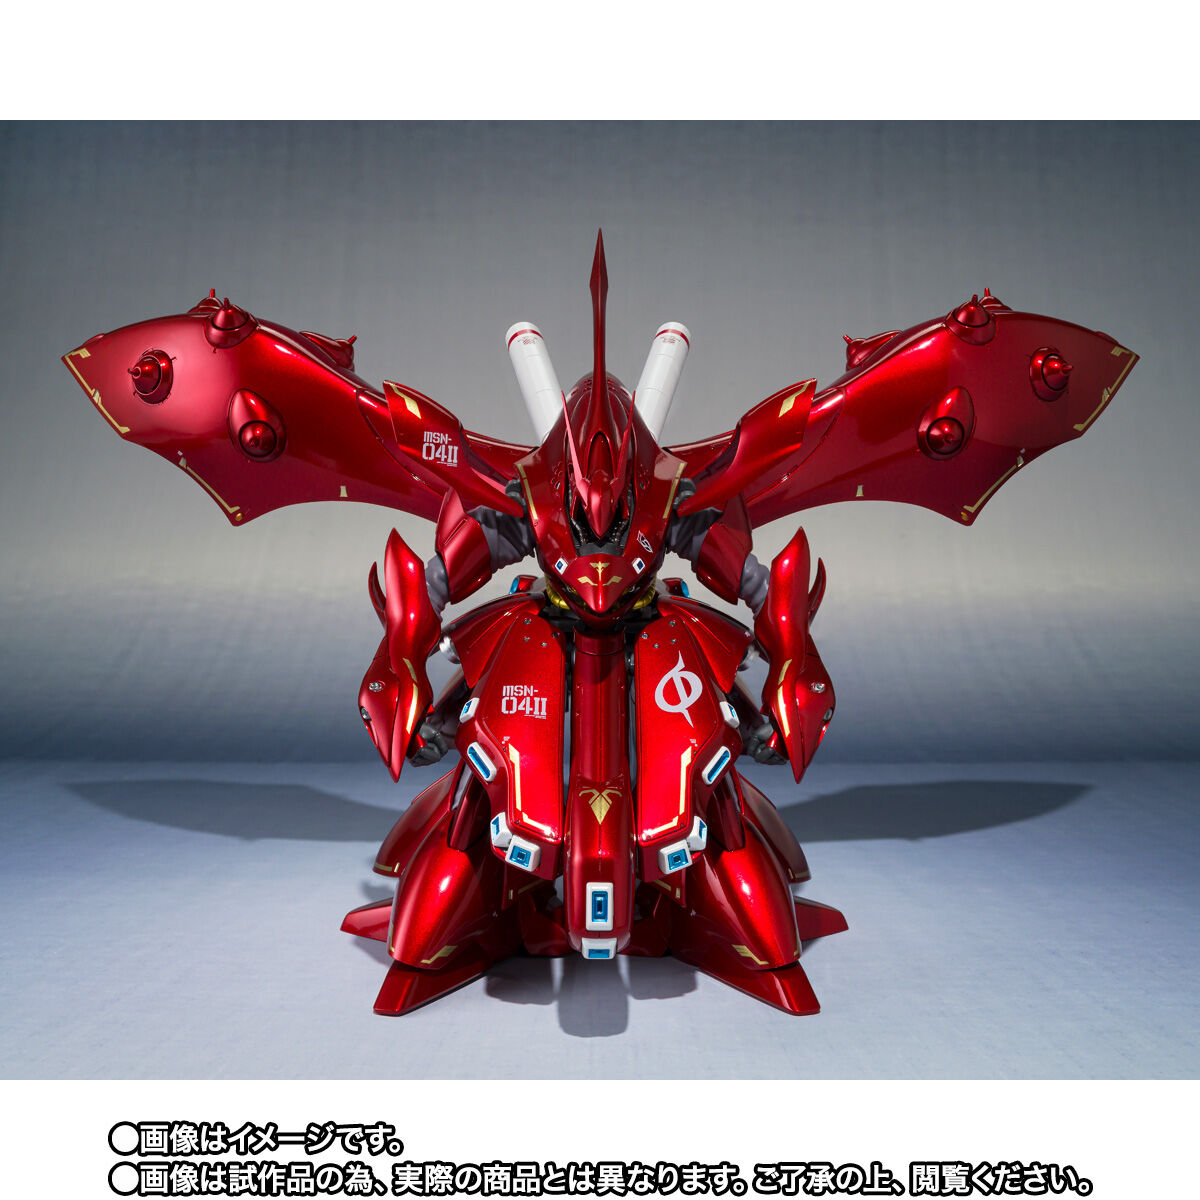 ROBOT魂 ＜SIDE MS＞ ナイチンゲール ～CHAR's SPECIAL COLOR